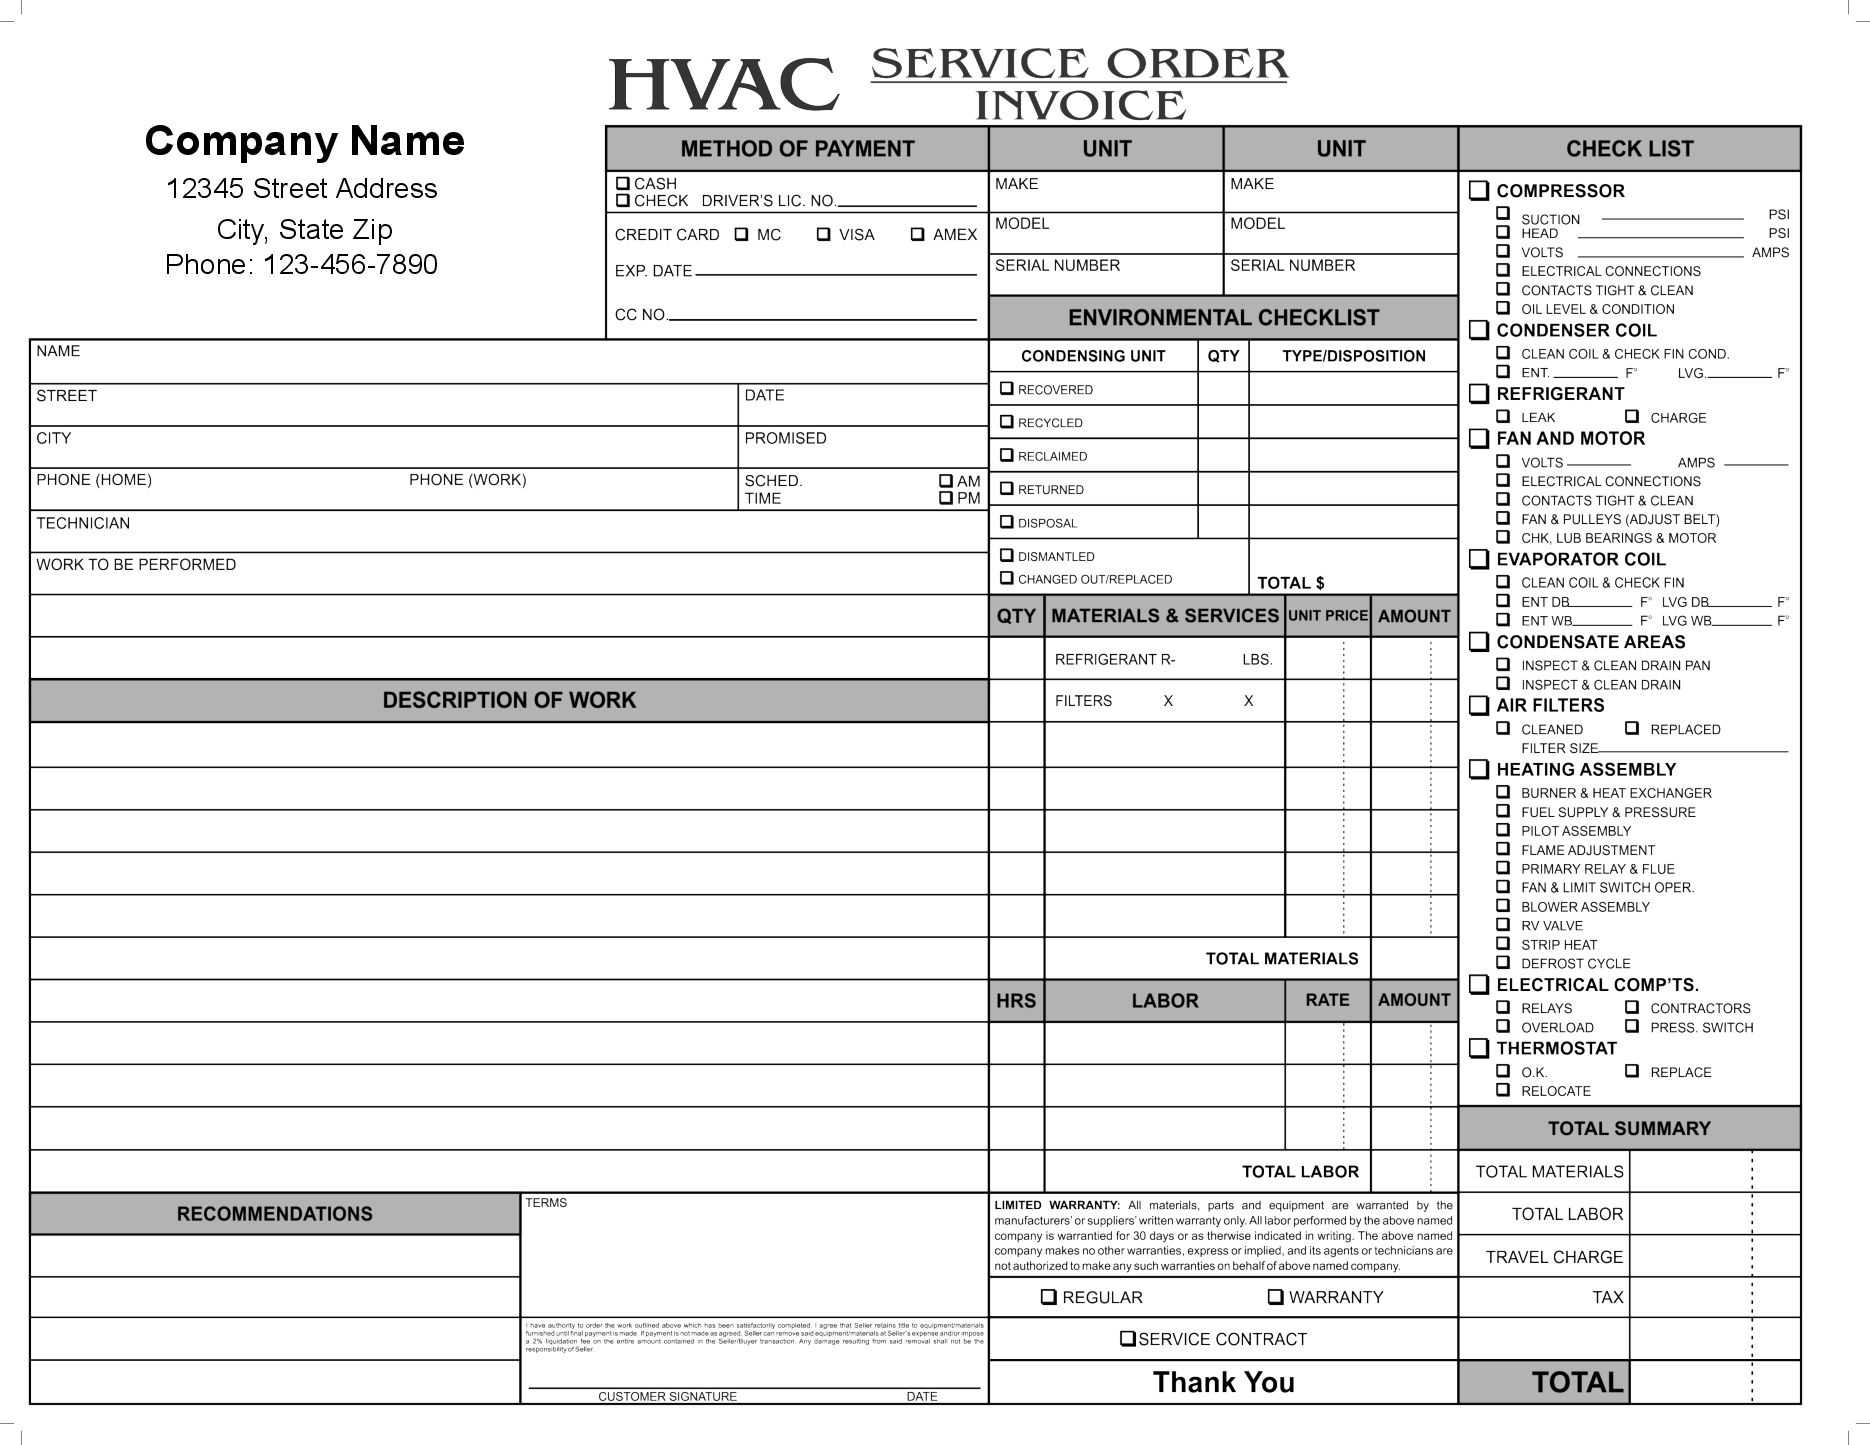 11 Hvac Invoice Template Free Top Invoice Templates Hvac Throughout Technical Service Report Template